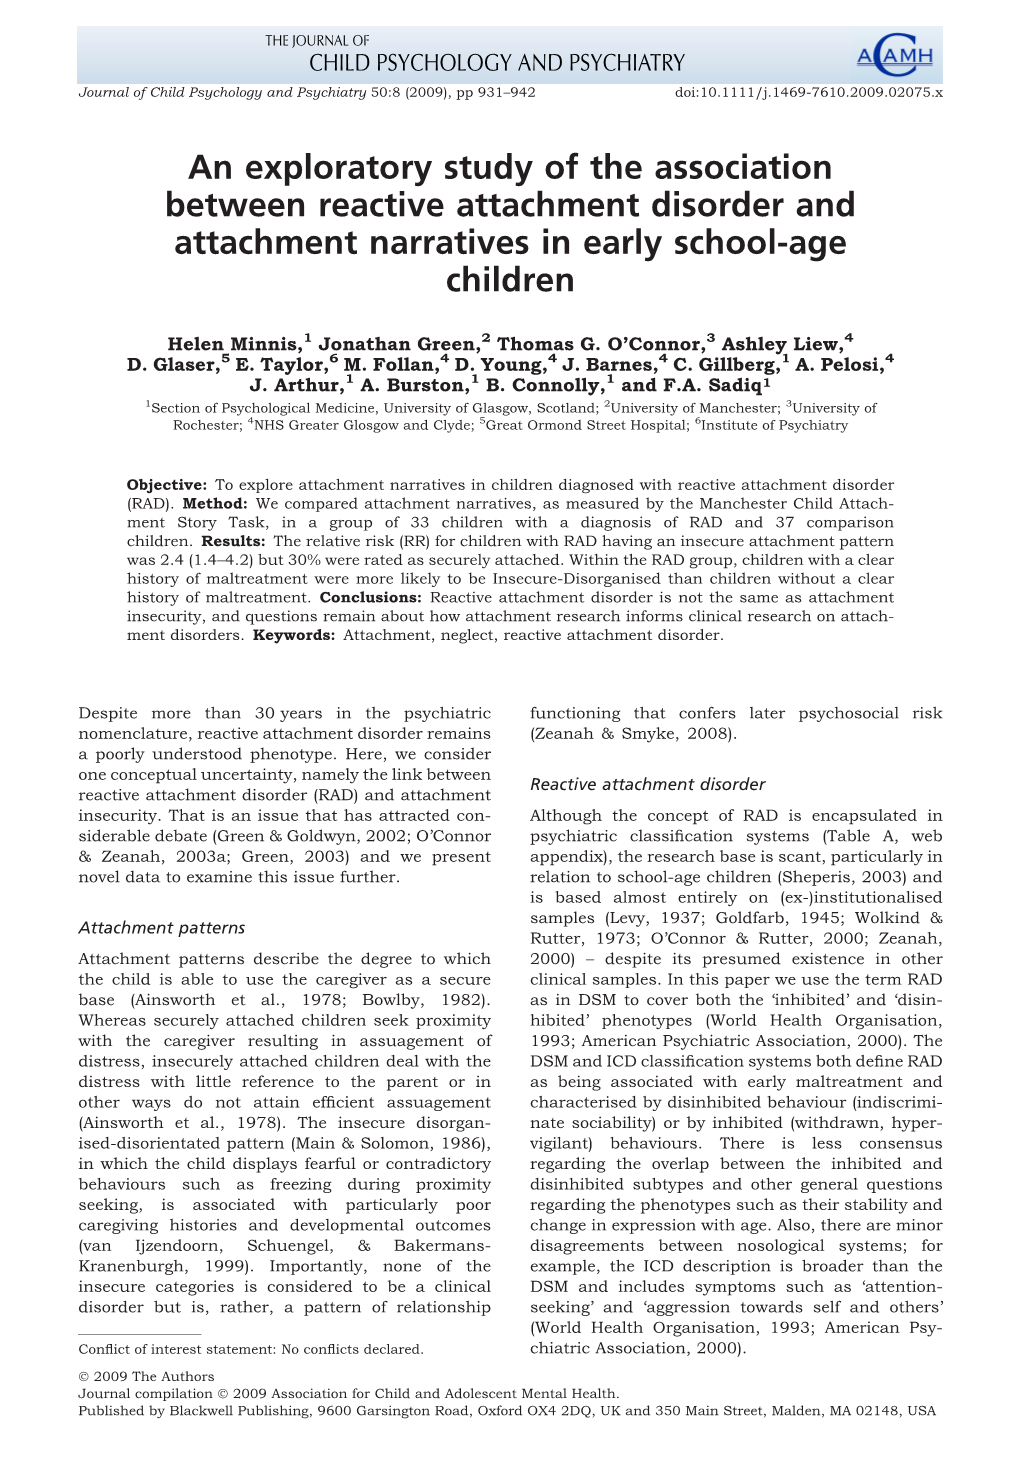 An Exploratory Study of the Association Between Reactive Attachment Disorder and Attachment Narratives in Early School-Age Children